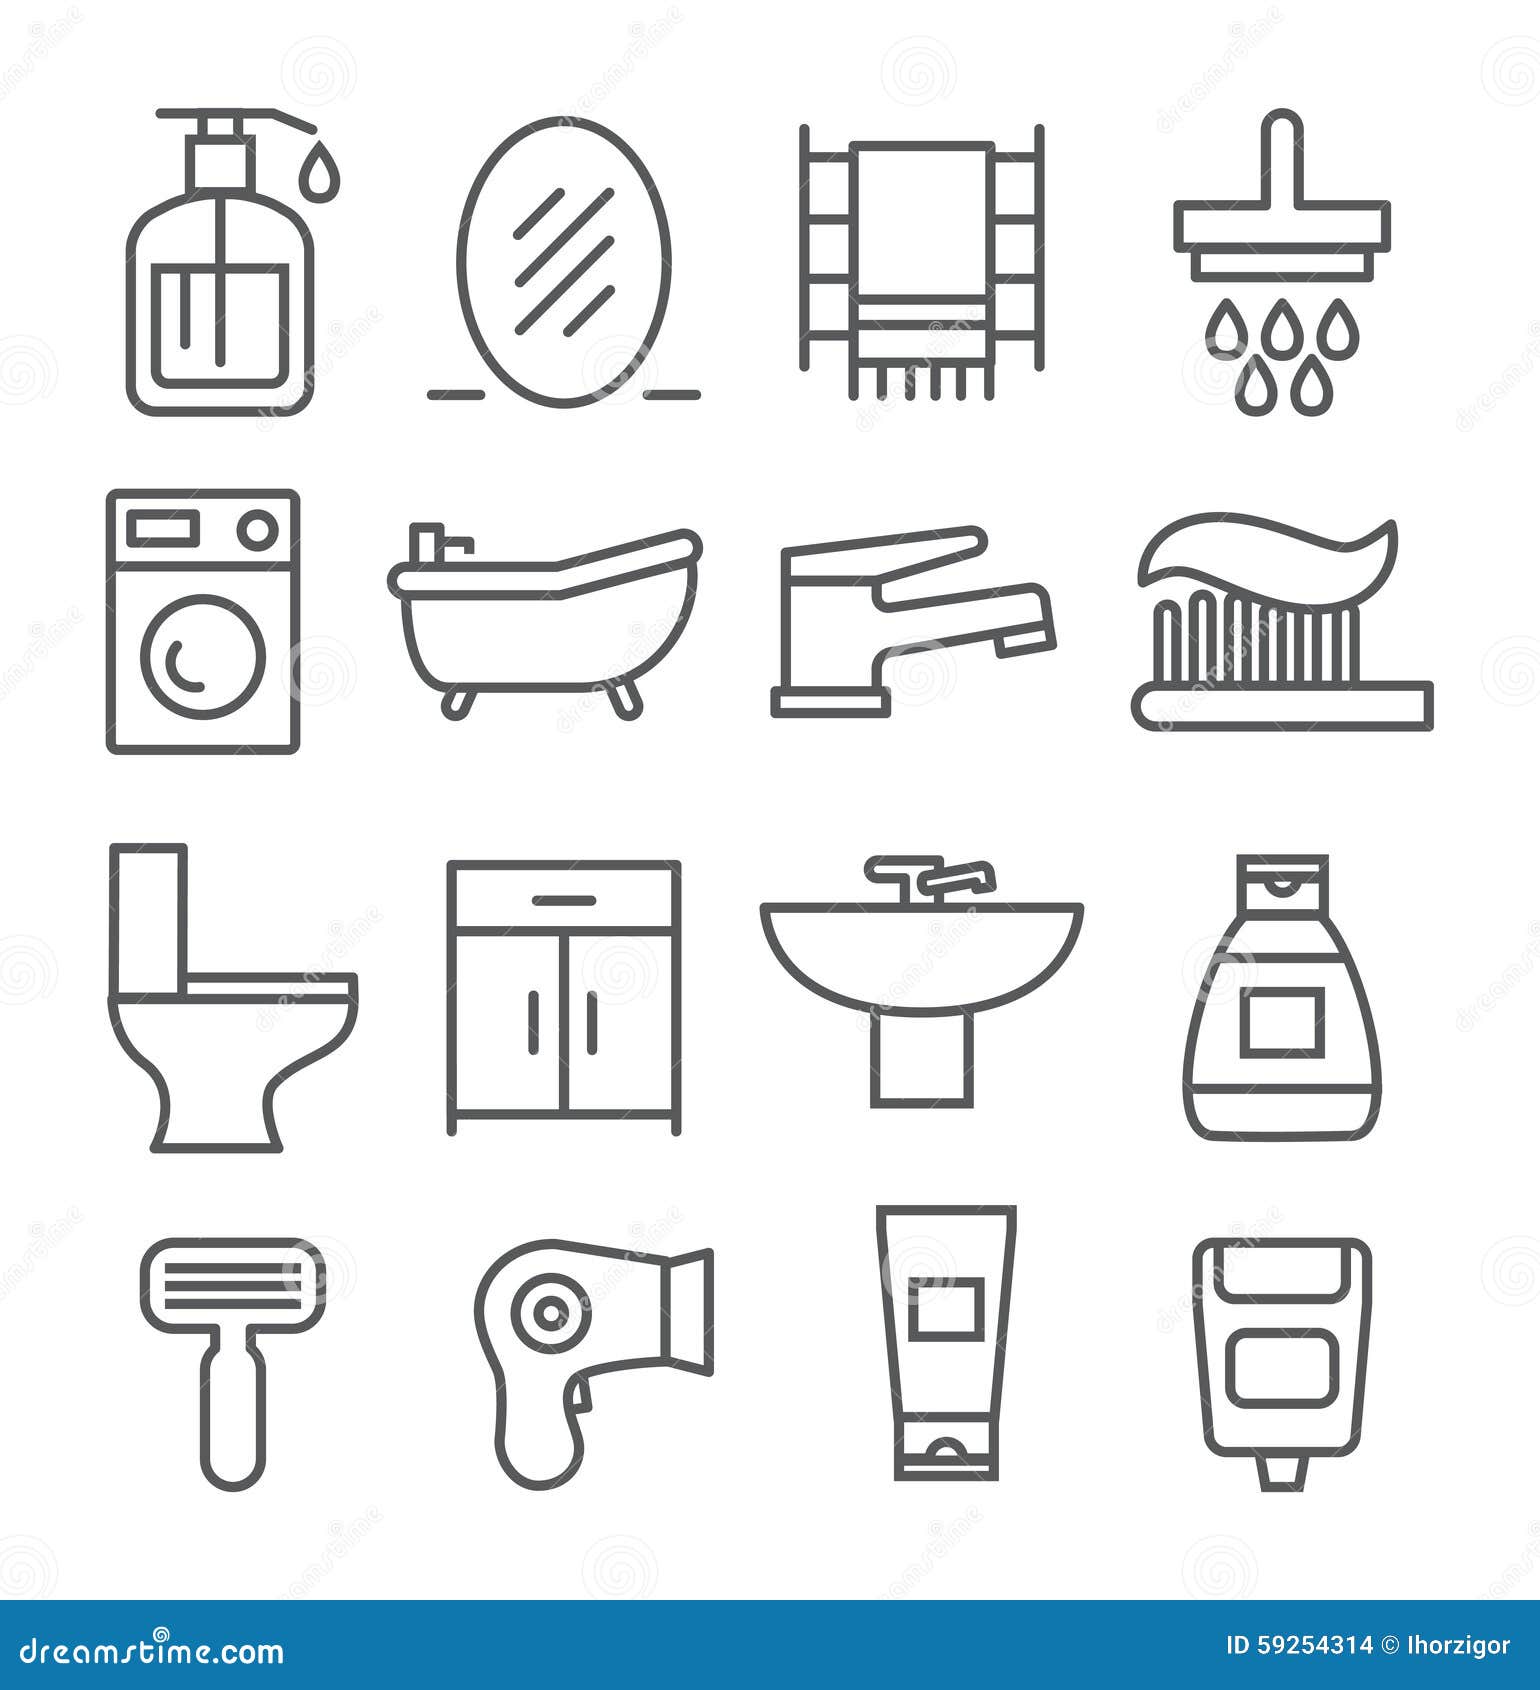 Cleaning Bathroom Stock Illustrations – 39,971 Cleaning Bathroom Stock  Illustrations, Vectors & Clipart - Dreamstime